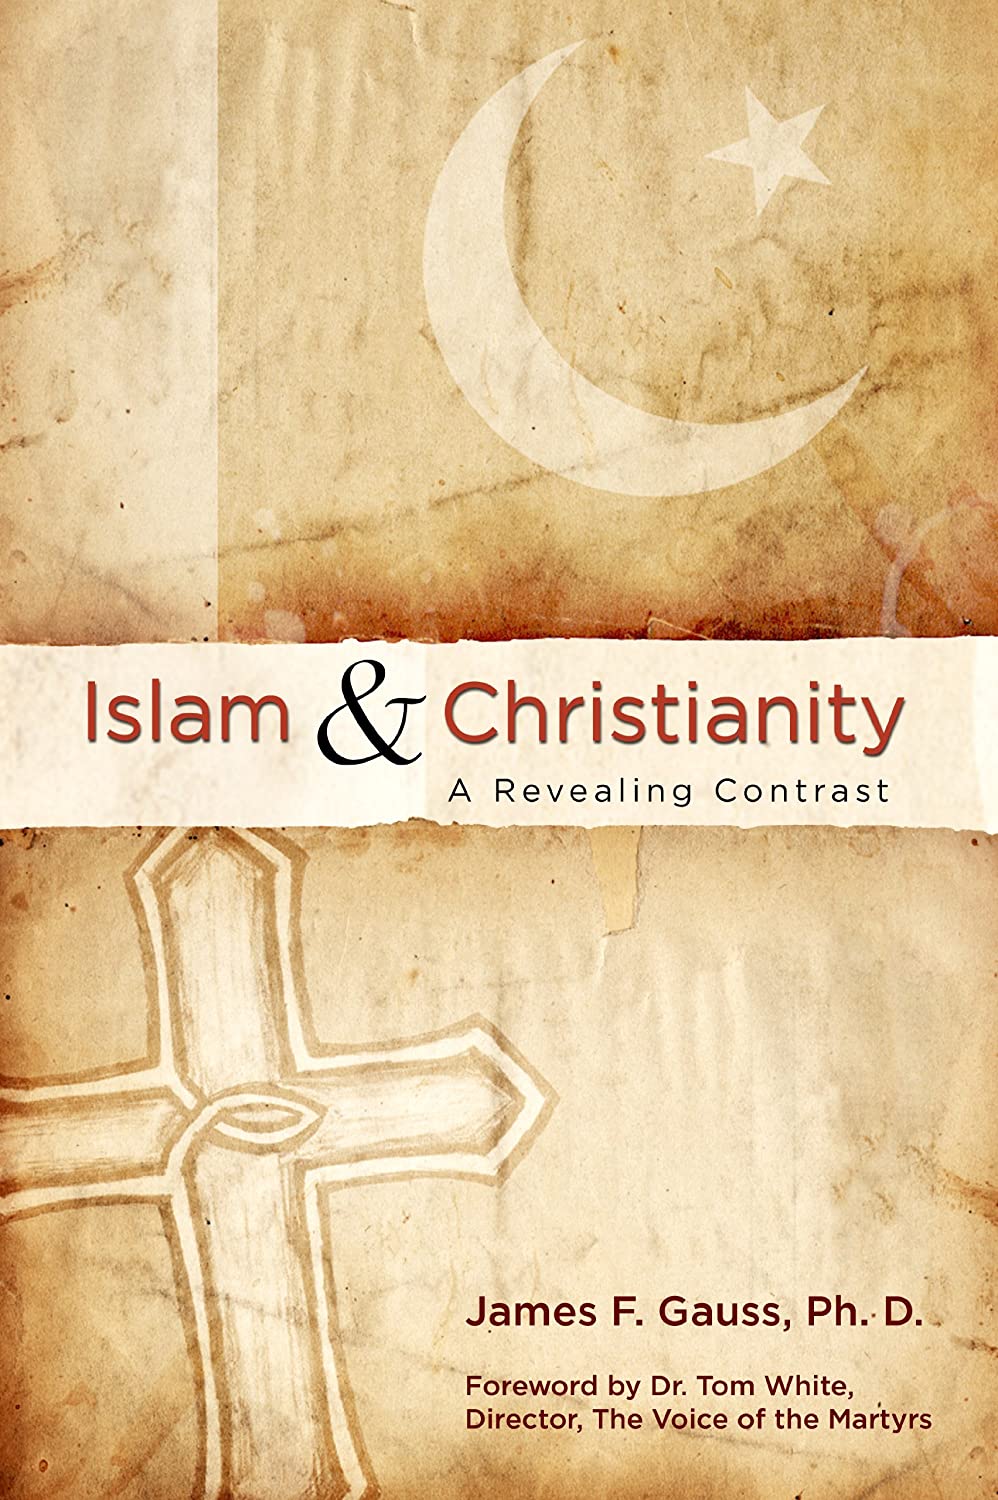 Islam & Christianity: A Revealing Contrast